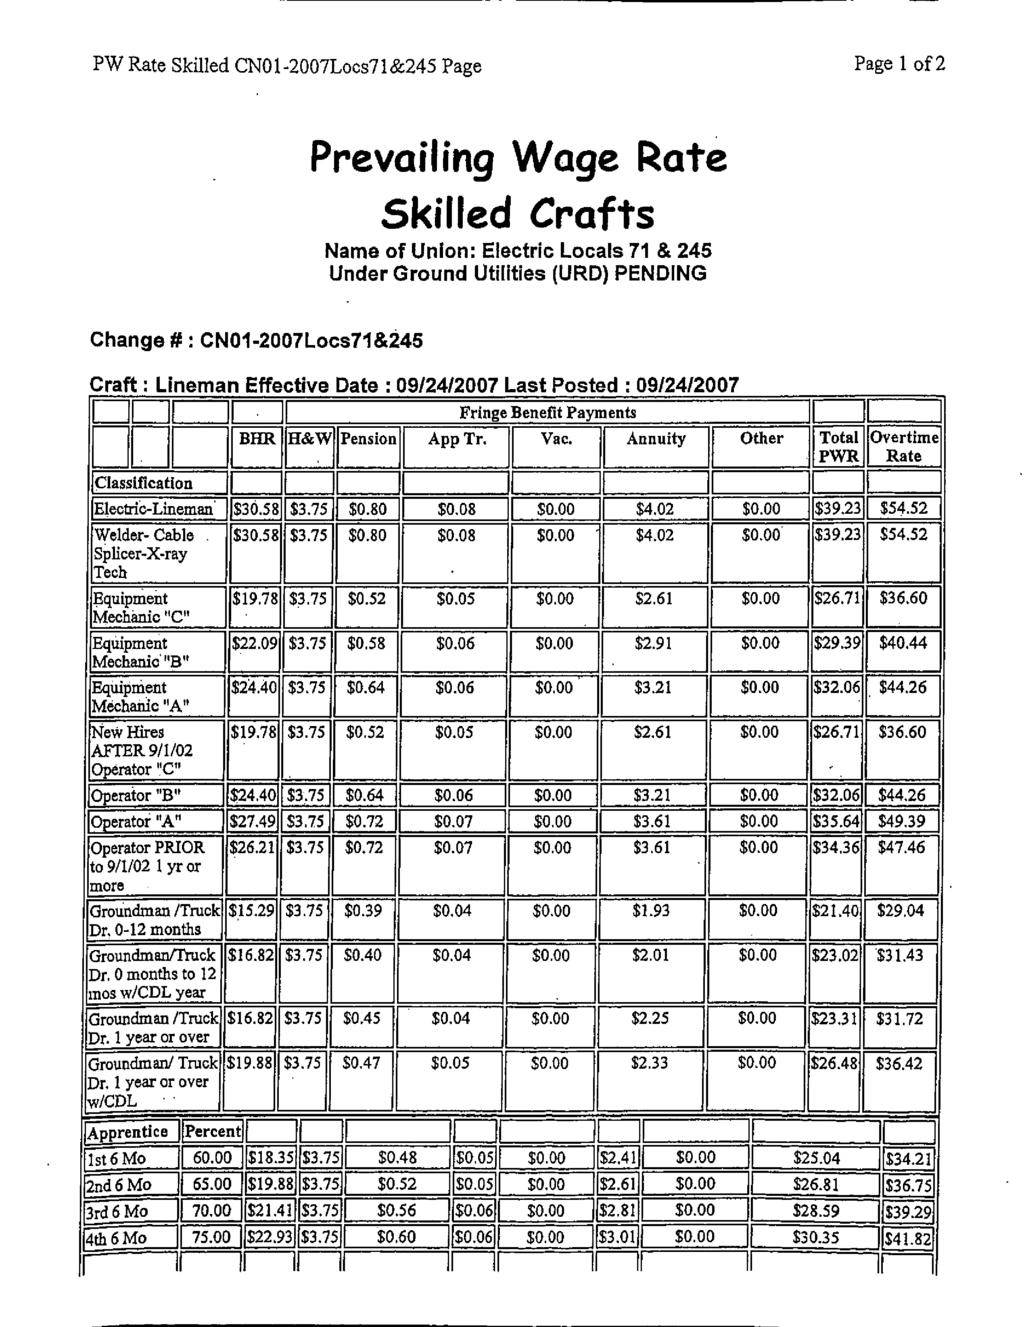 PW Rate Skilled CNO1-2007Locs71&245 Page Page 1 of 2 Change # : CNO1-2007Locs71&245 Prevailing Wage Rate Skilled Crafts Name of Union: Electric Locals 71 & 245 Under Ground Utilities (URD) PENDING